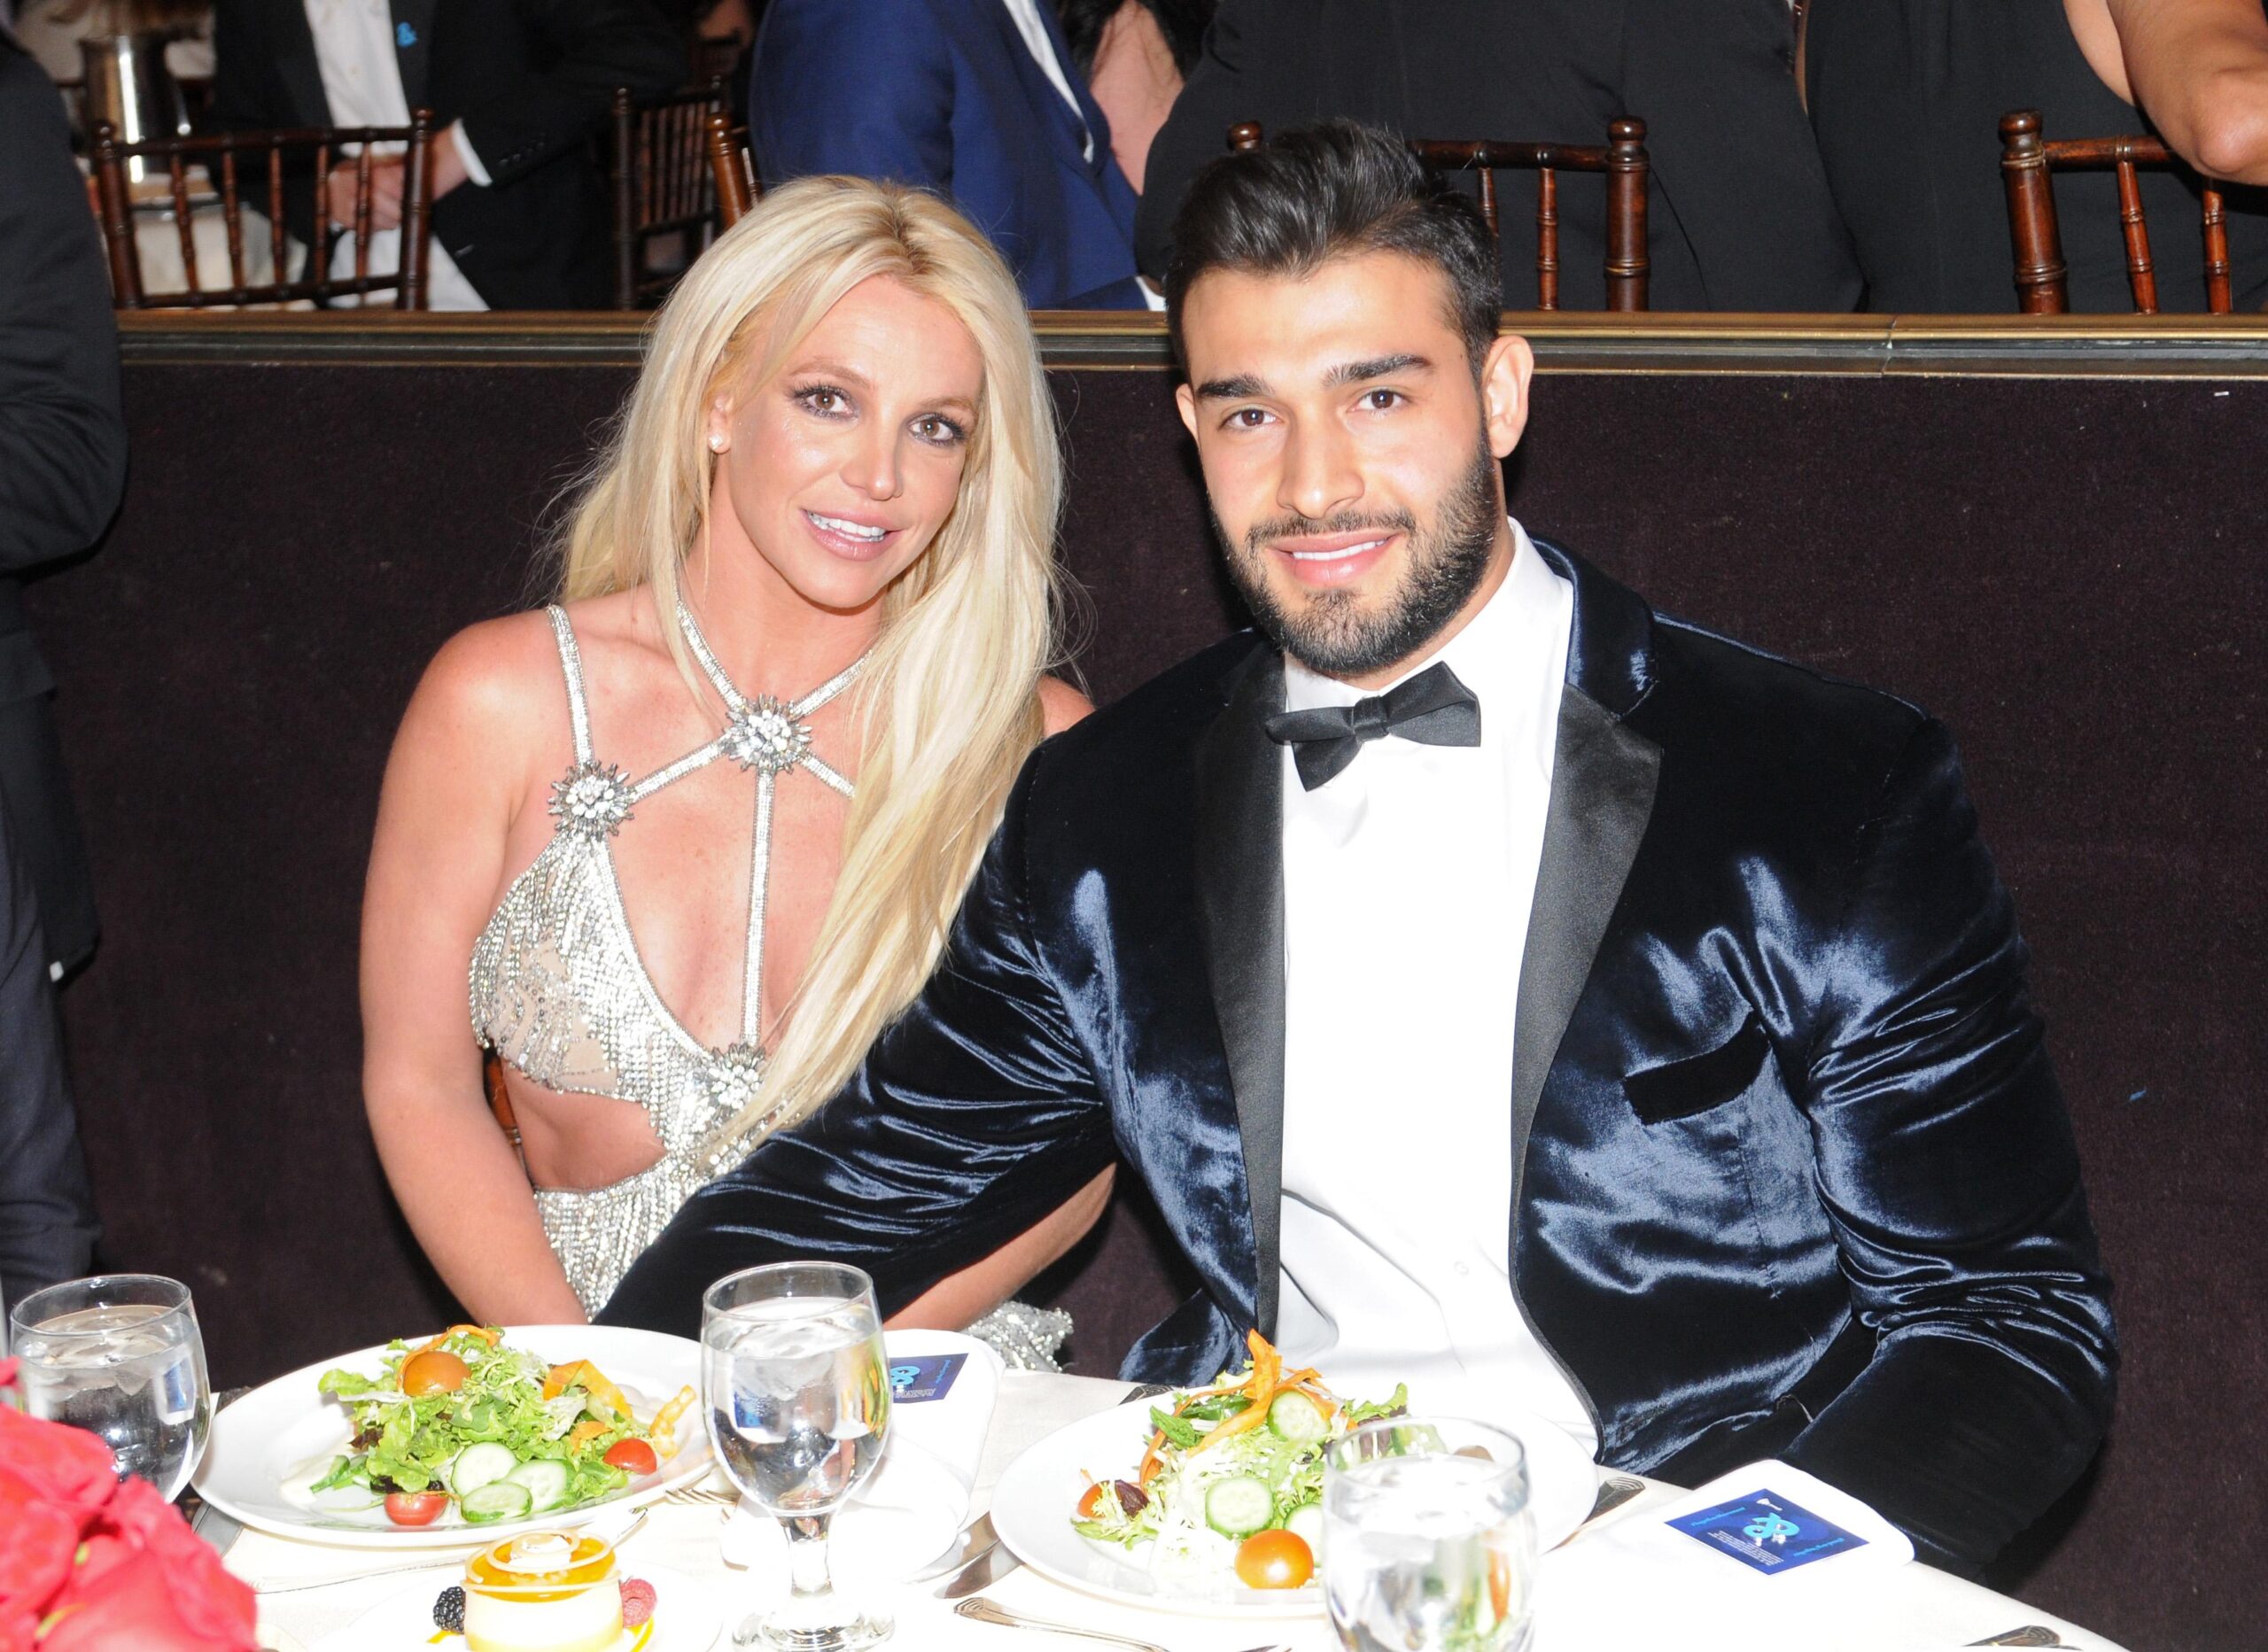 Briney Spears was spotted with her boyfriend Sam Asgari recently. In Picture: Honoree Britney Spears (L) and Sam Asghari attend the 29th Annual GLAAD Media Awards at The Beverly Hilton Hotel on April 12, 2018 in Beverly Hills, California.